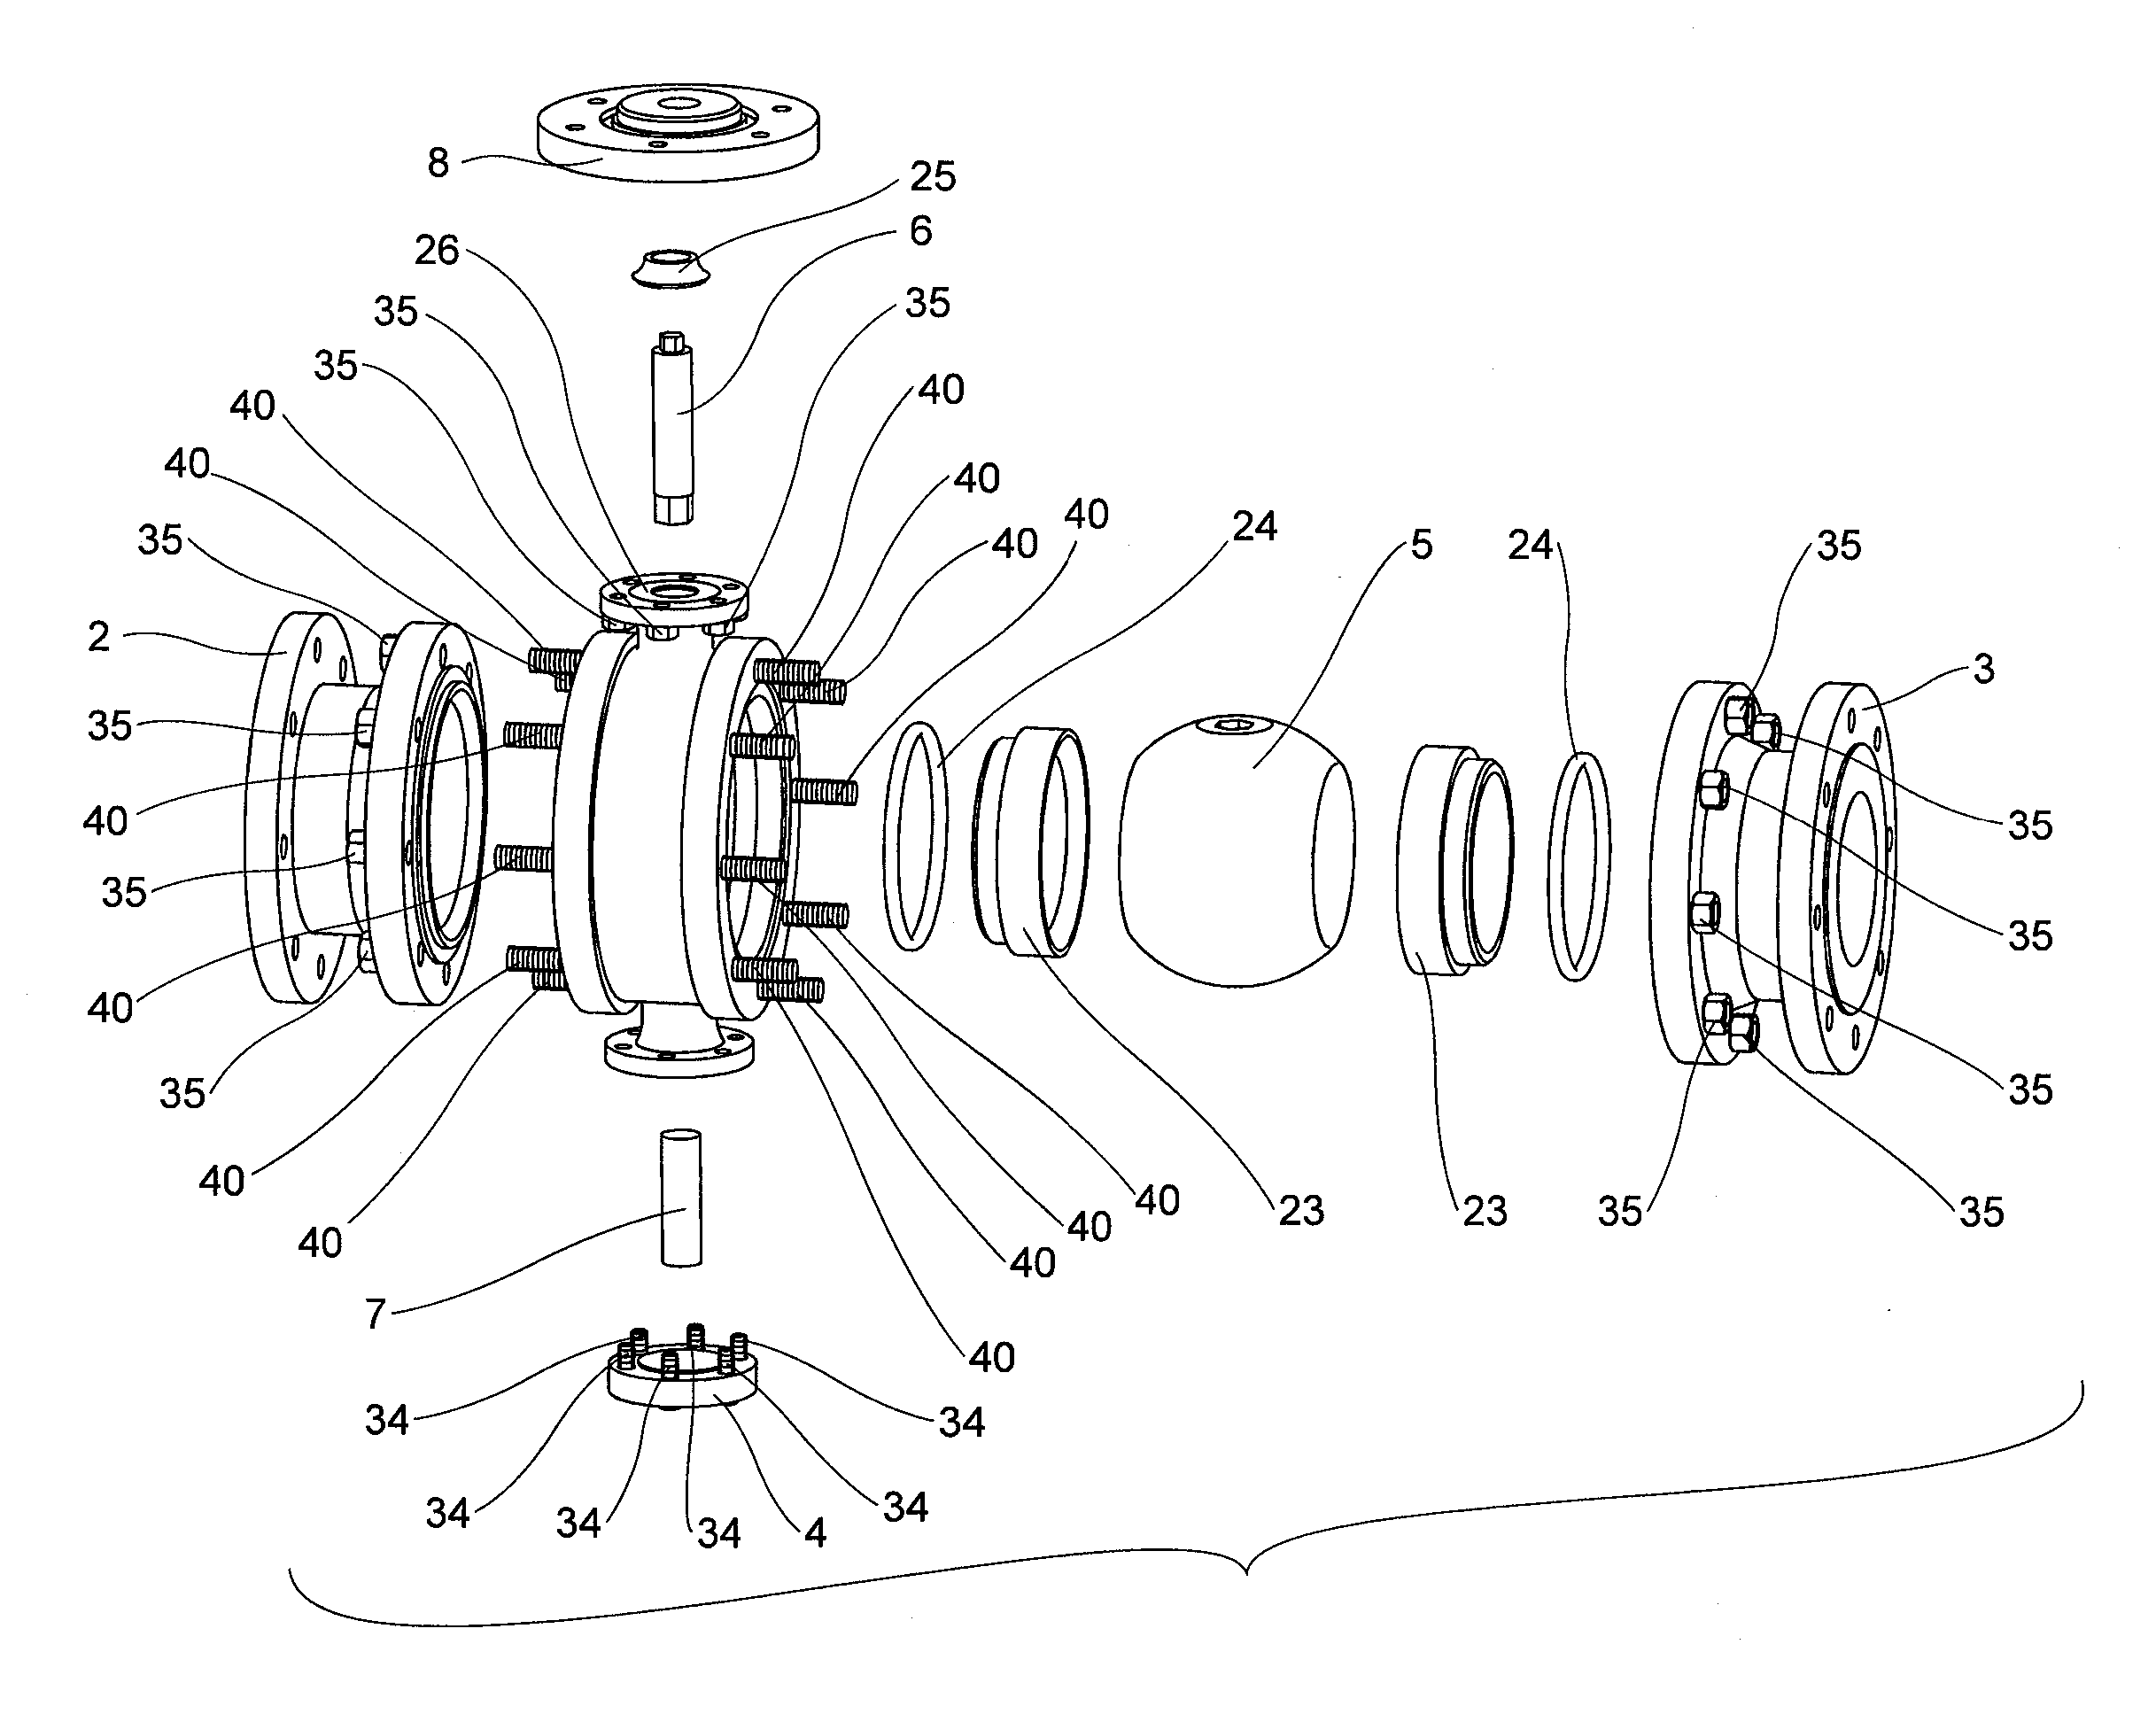 Rotary valve adapter assembly with planetary gear system